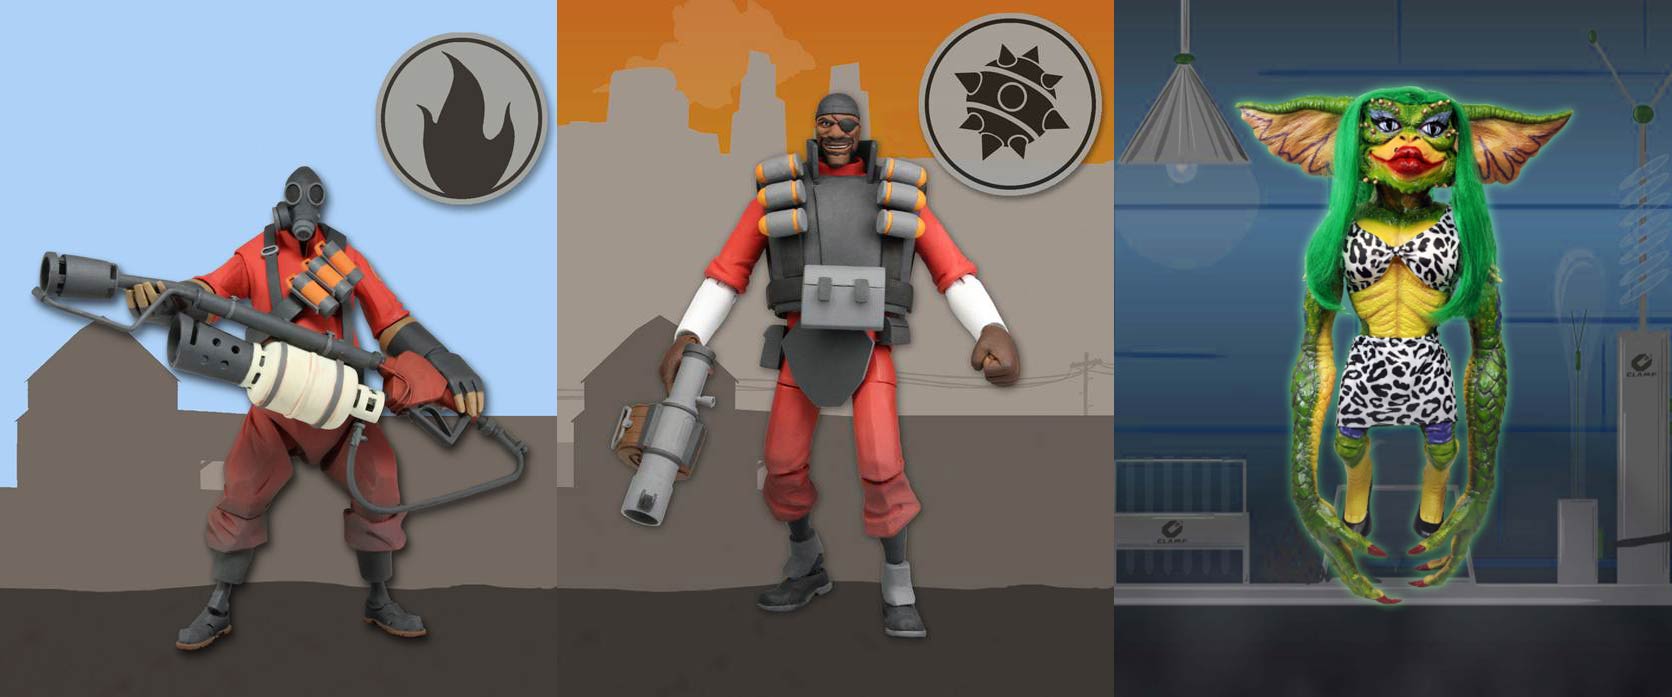 NECAOnline.com | Shipping Soon: Team Fortress 2 Deluxe Action Figures & Greta Gremlin!